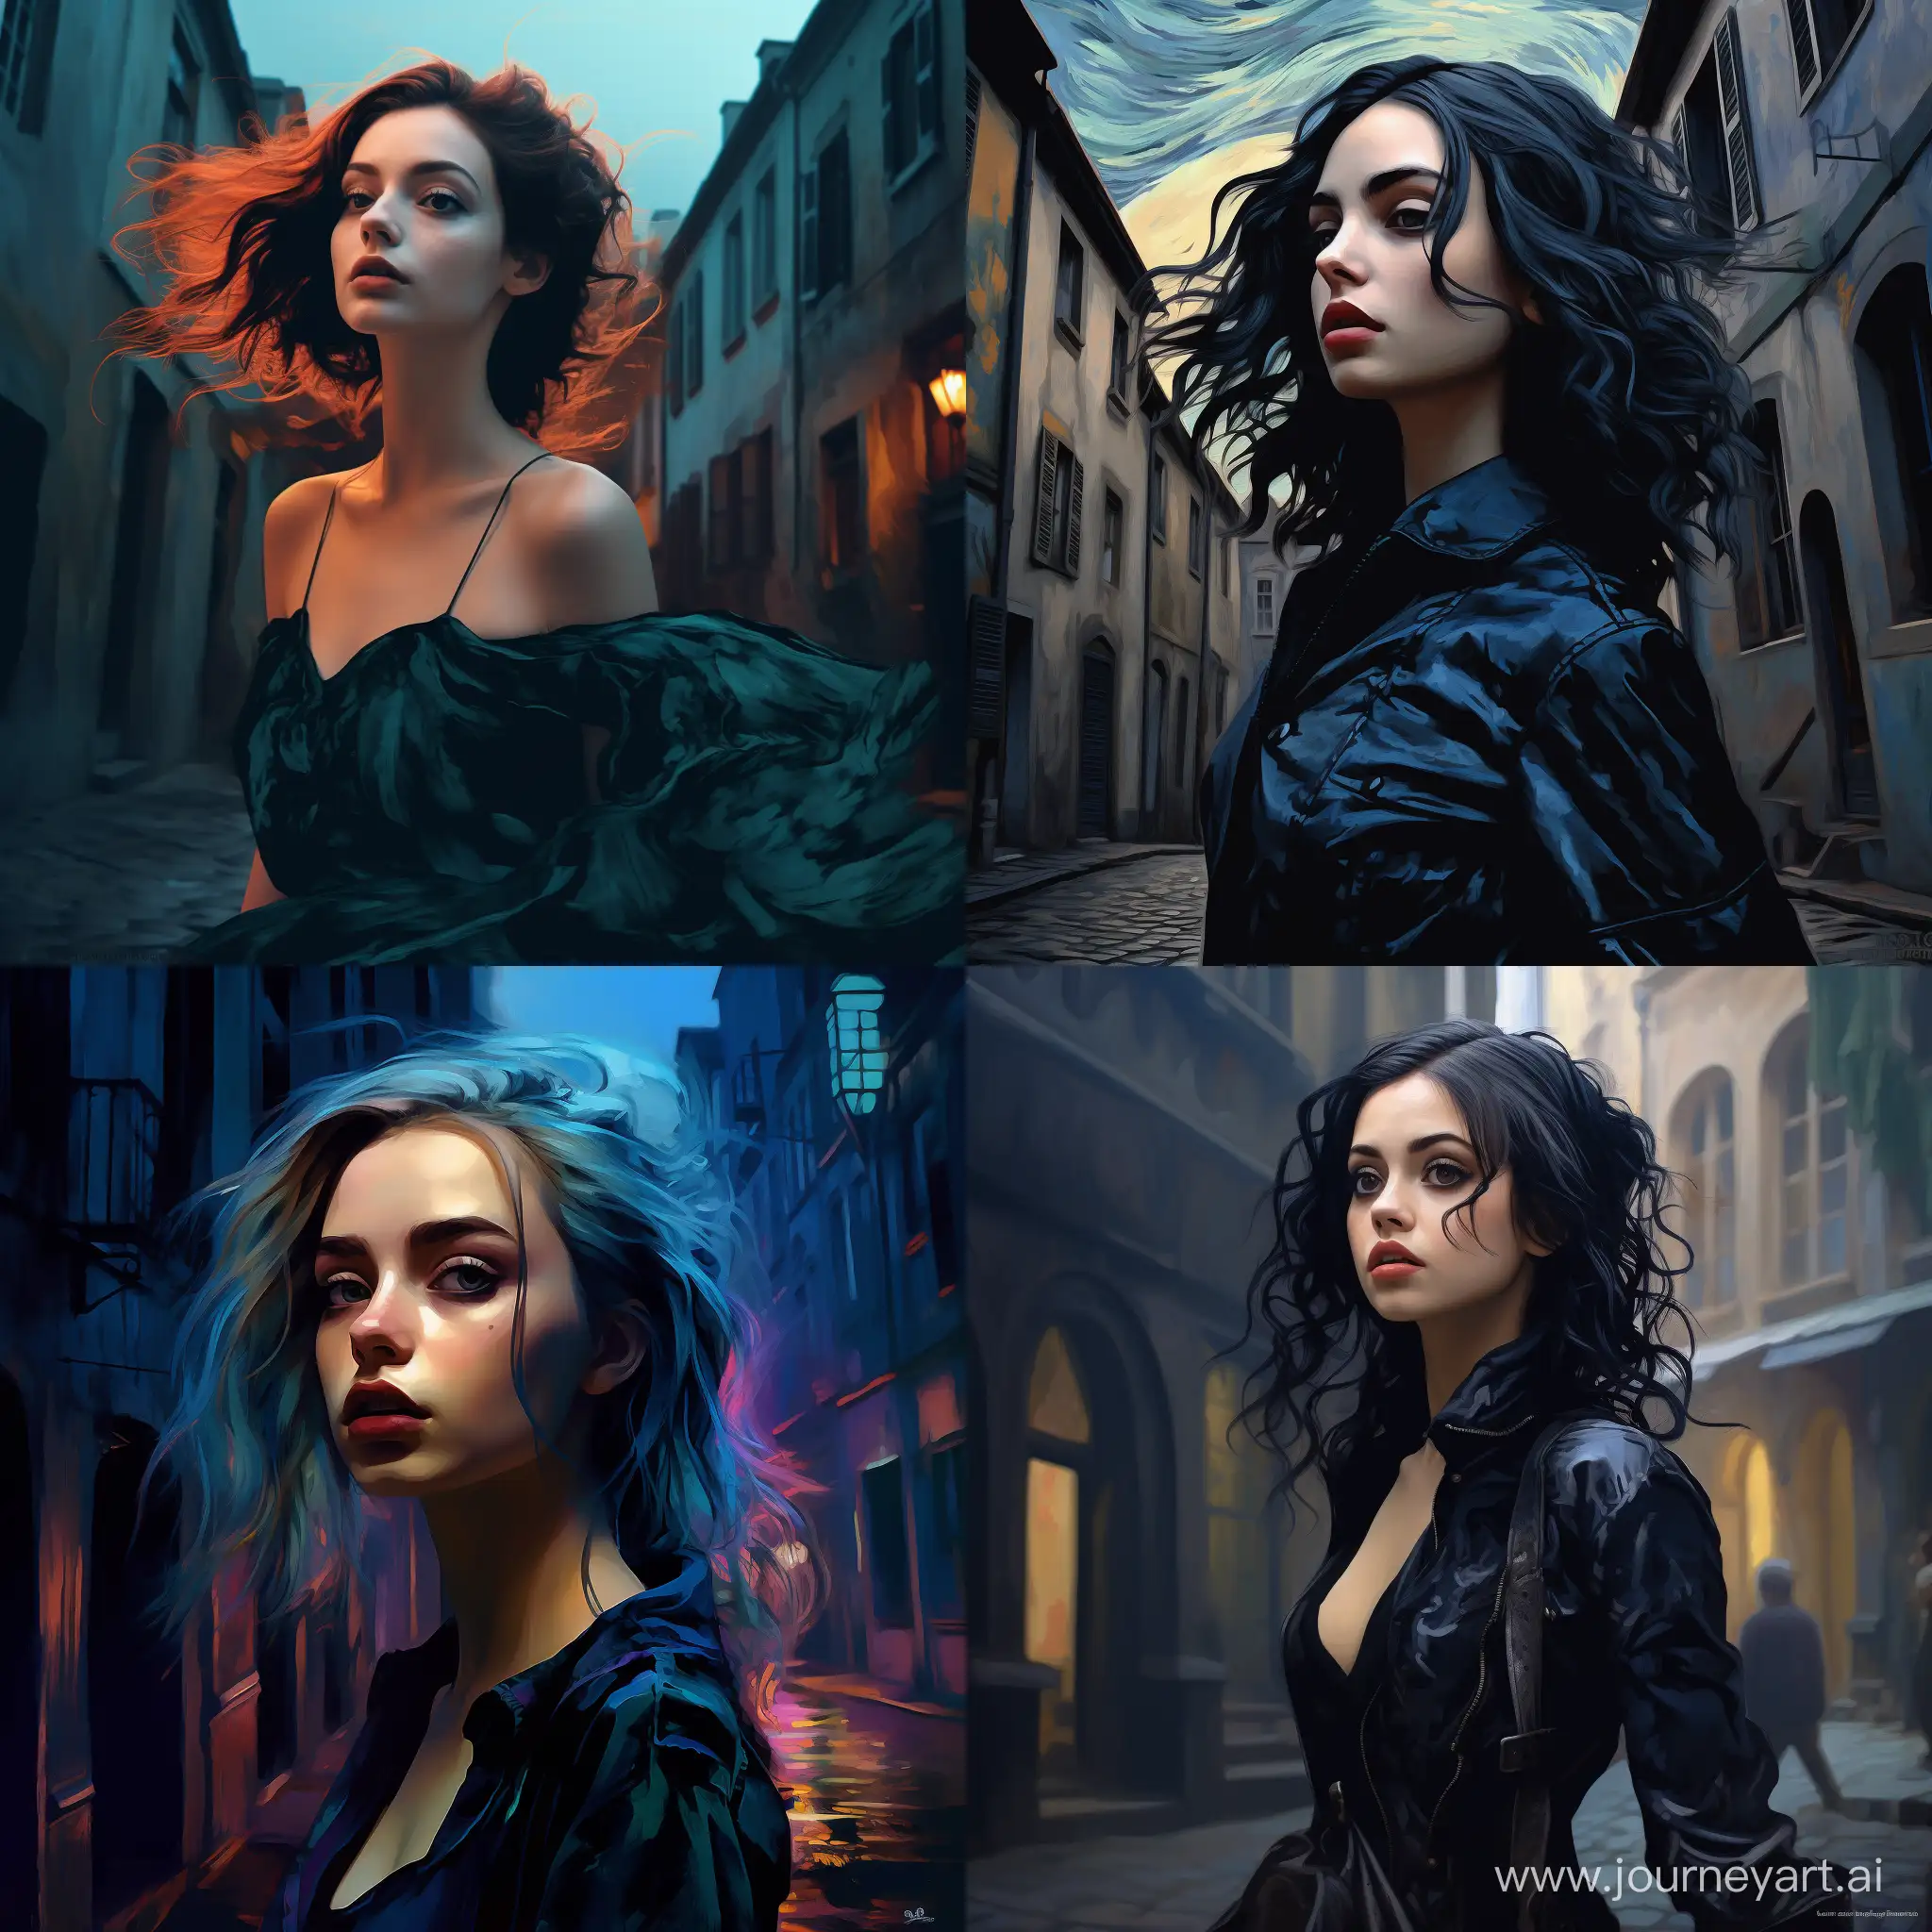 TimeTraveling-Synthwave-Explorer-in-18thCentury-Streets-by-Vincent-van-Gogh-and-Tim-Burton